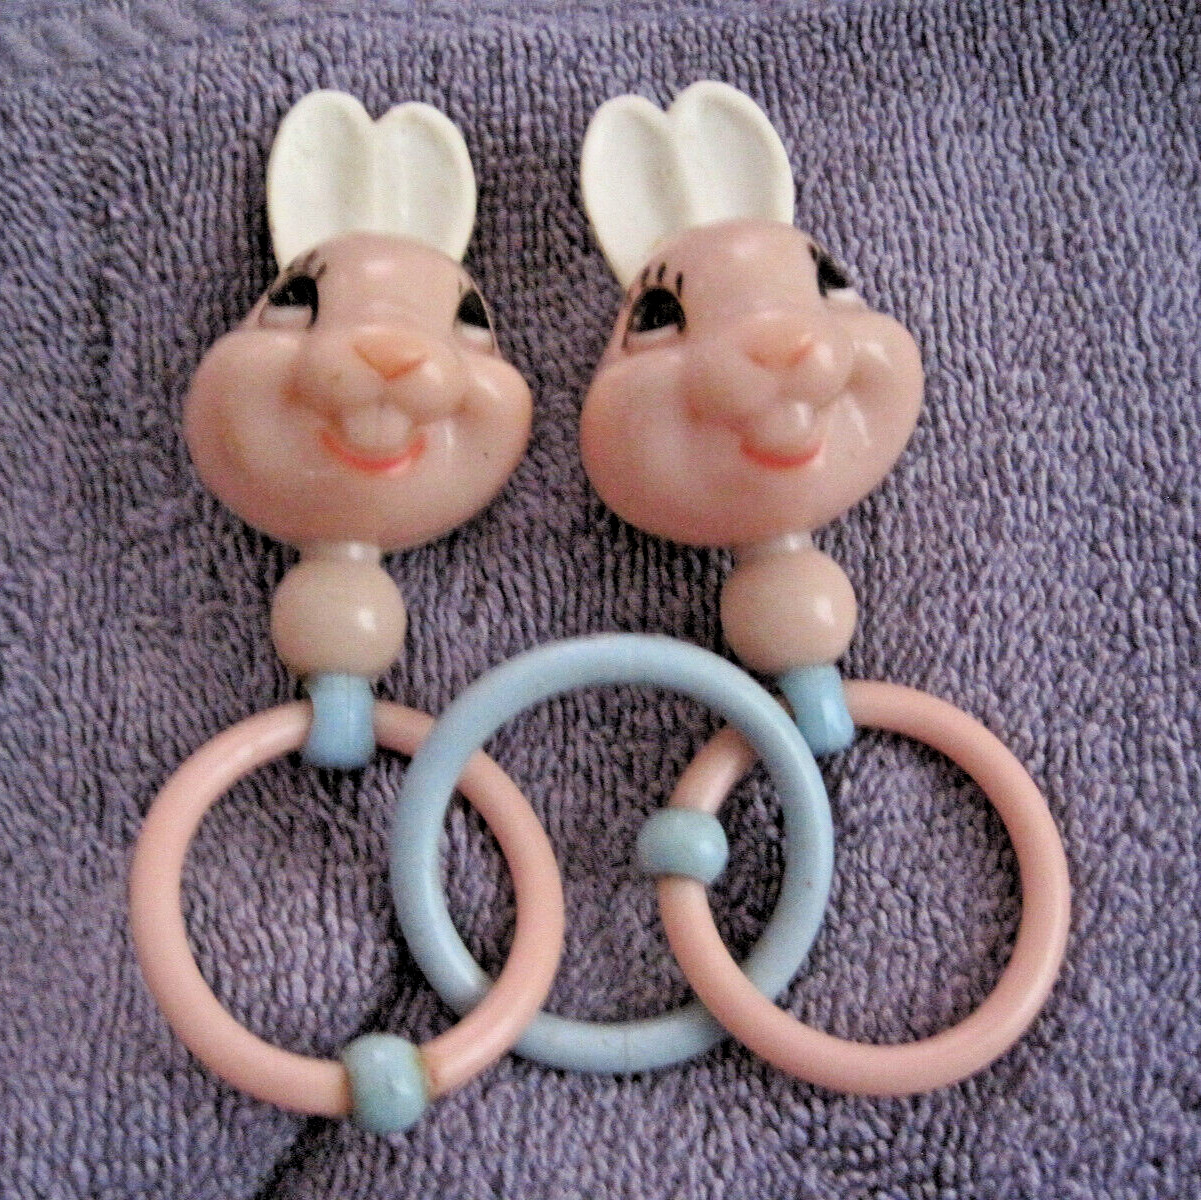 Cute Antique bunny  Baby rattles joined by rings / pink/ blue / white / SEE LIST